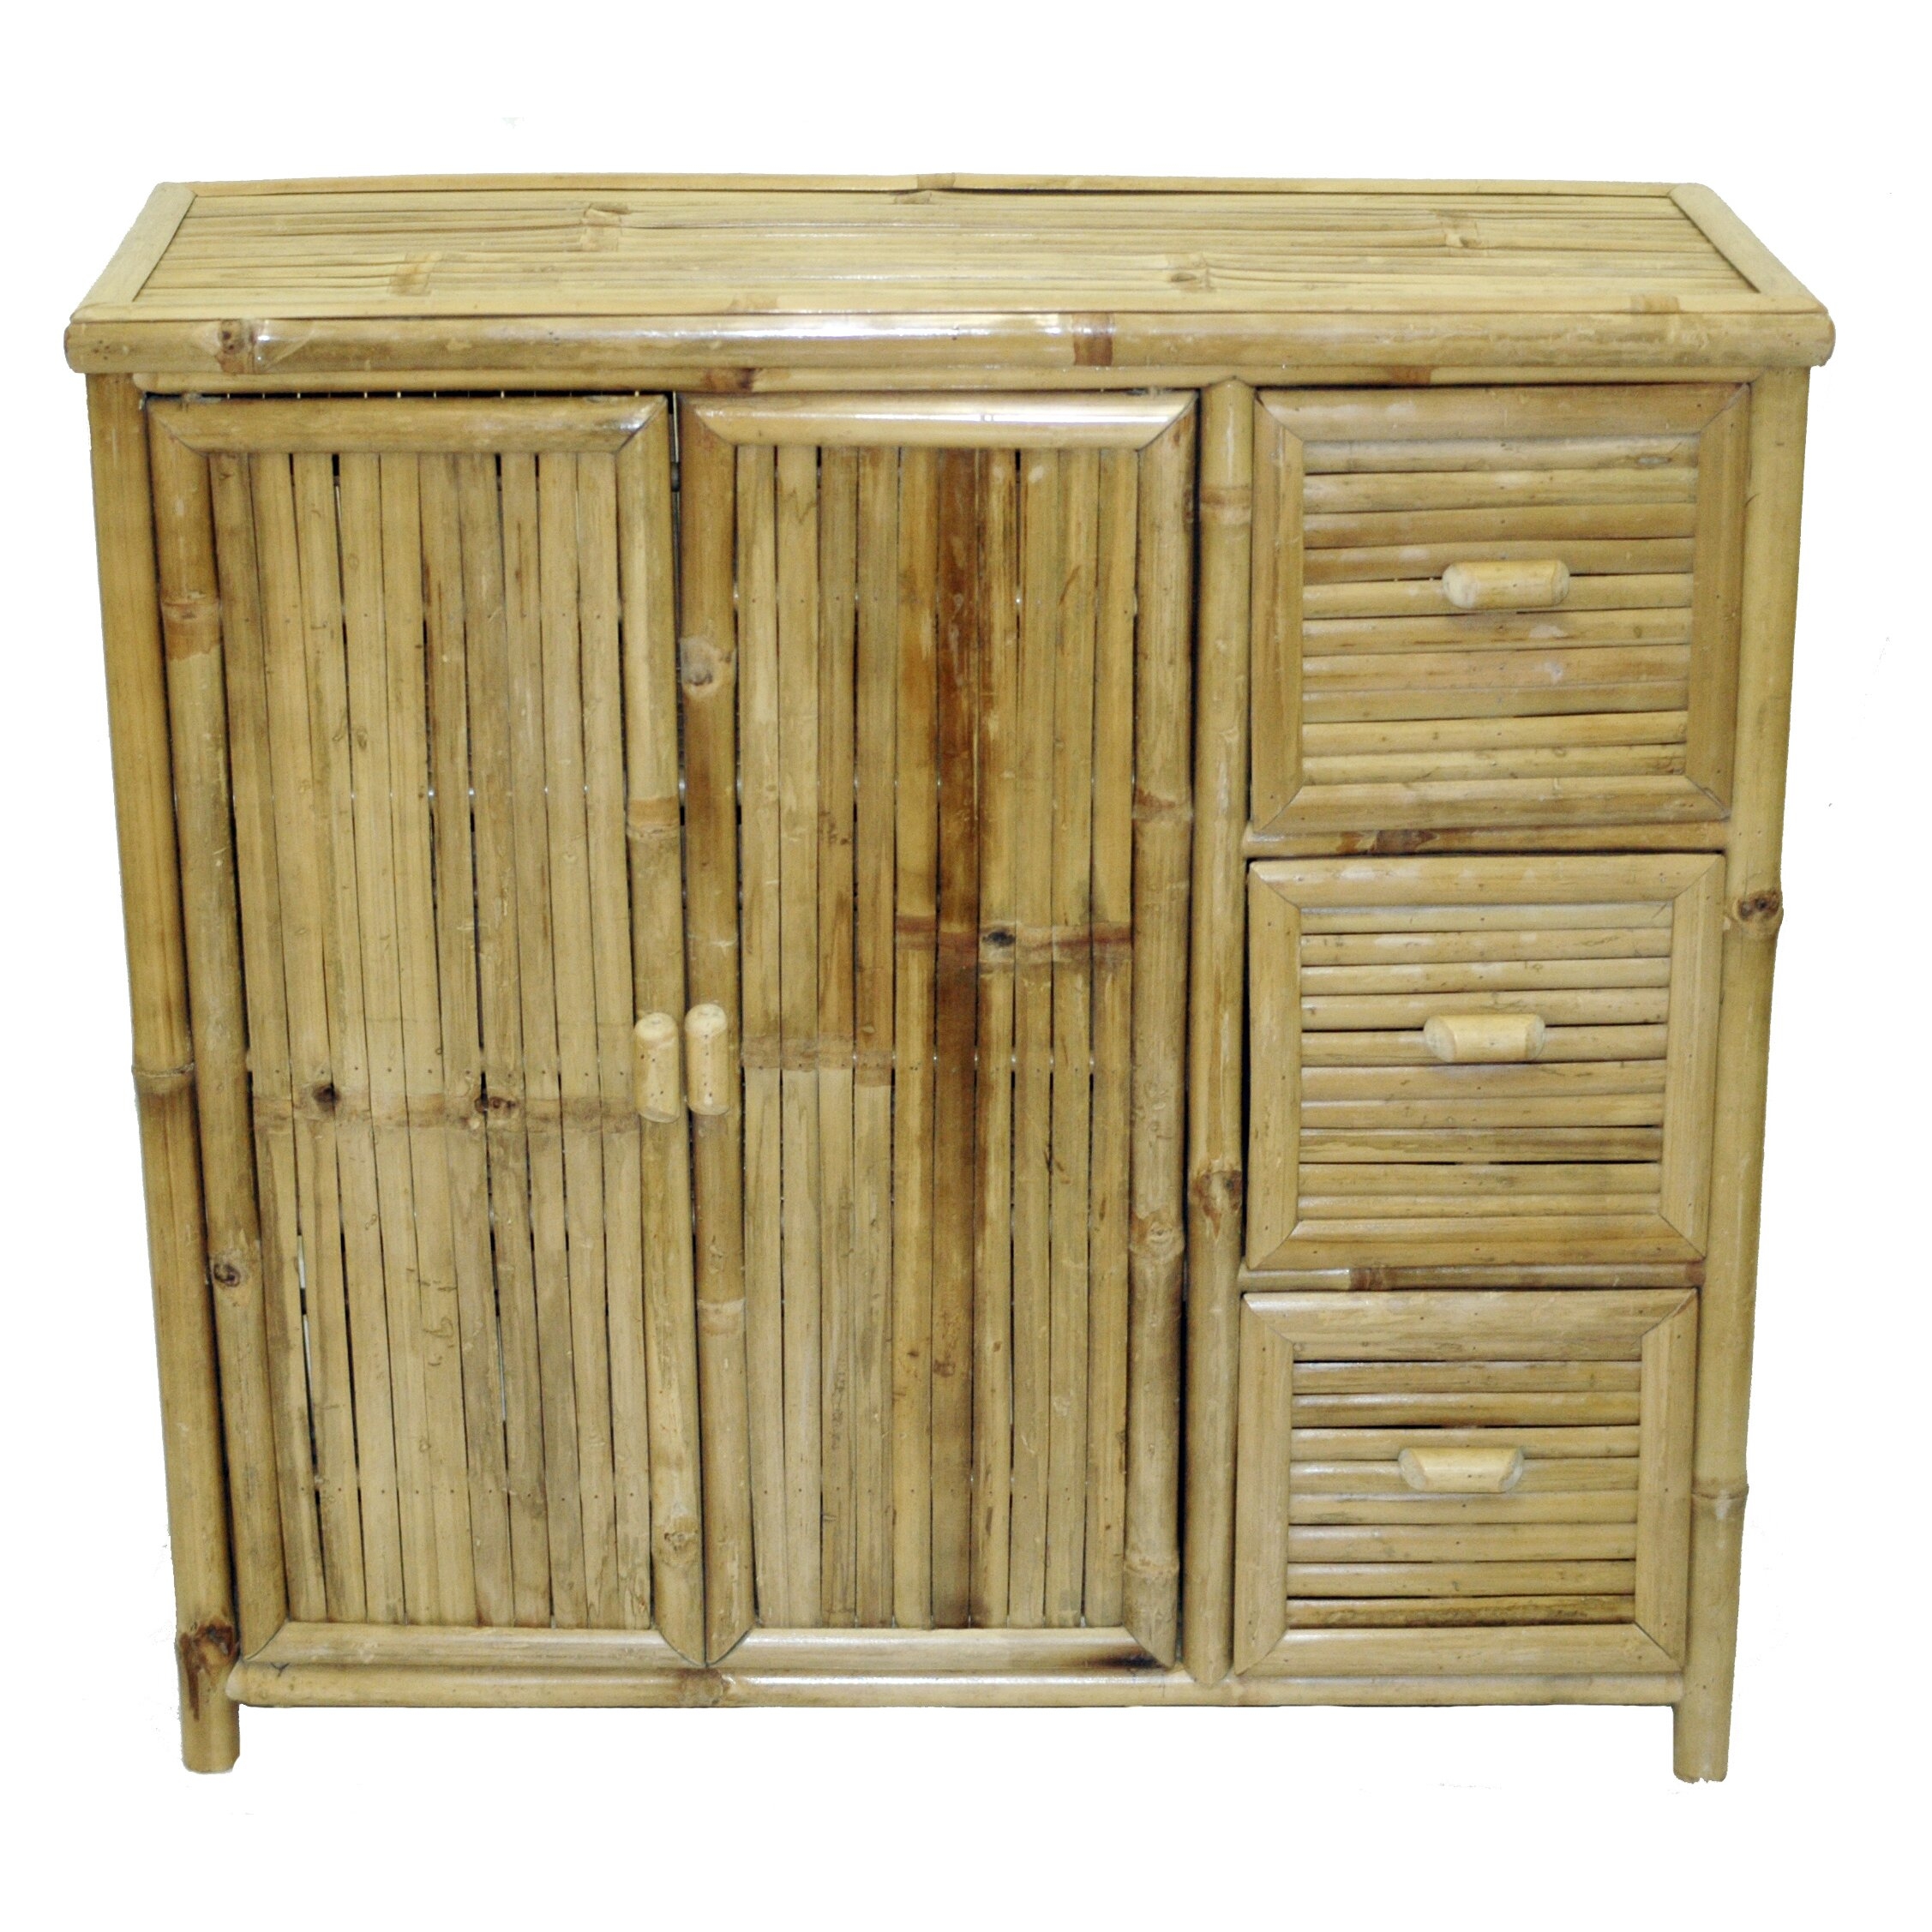 Bamboo Storage Console Cabinet with Doors and Drawers in Natural